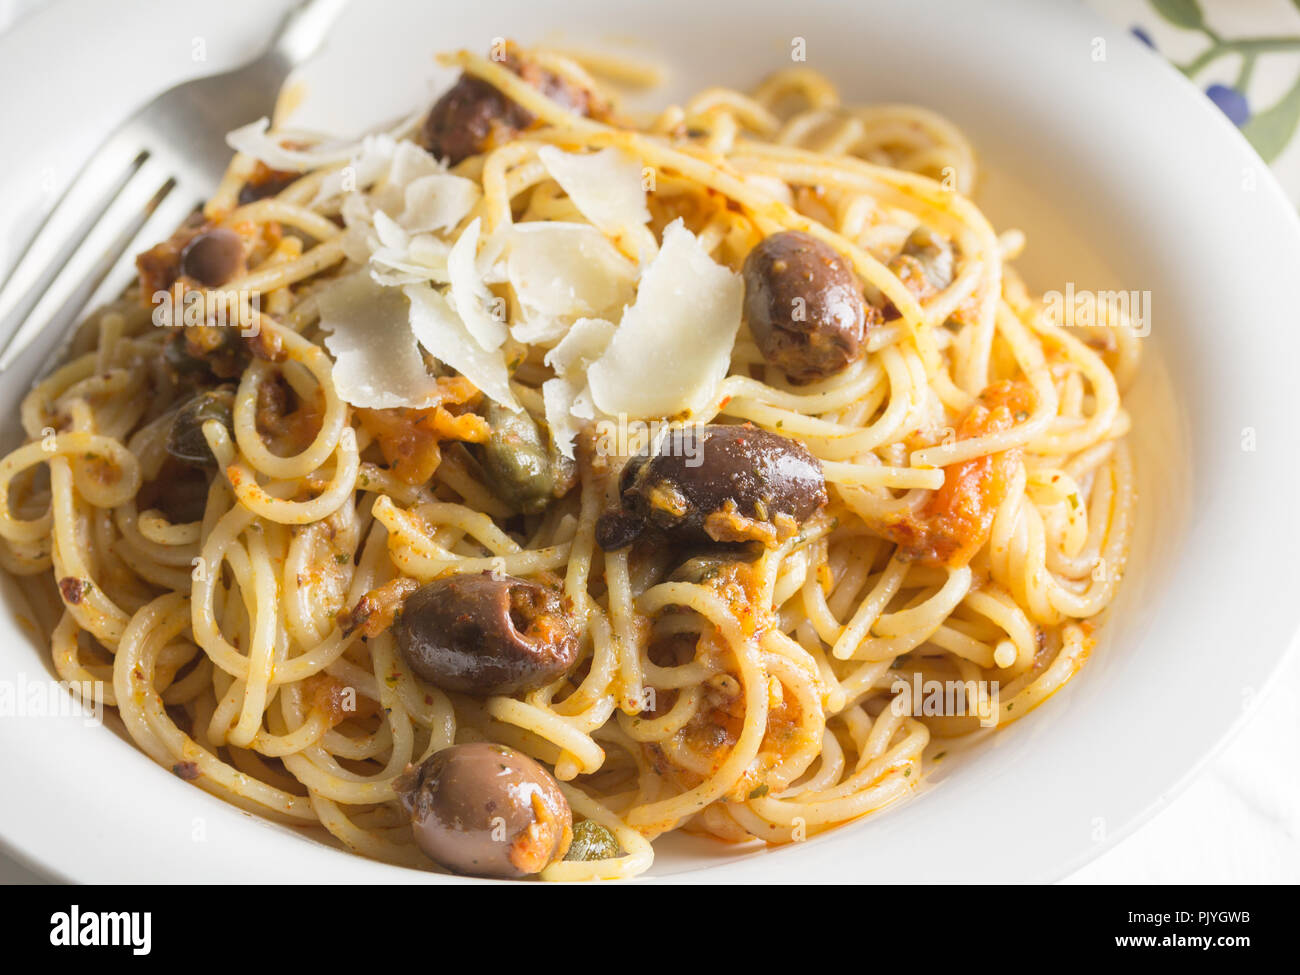 Spaghetti with anchovies, capers and black olives close up topped with parmigiano cheese shavings Stock Photo